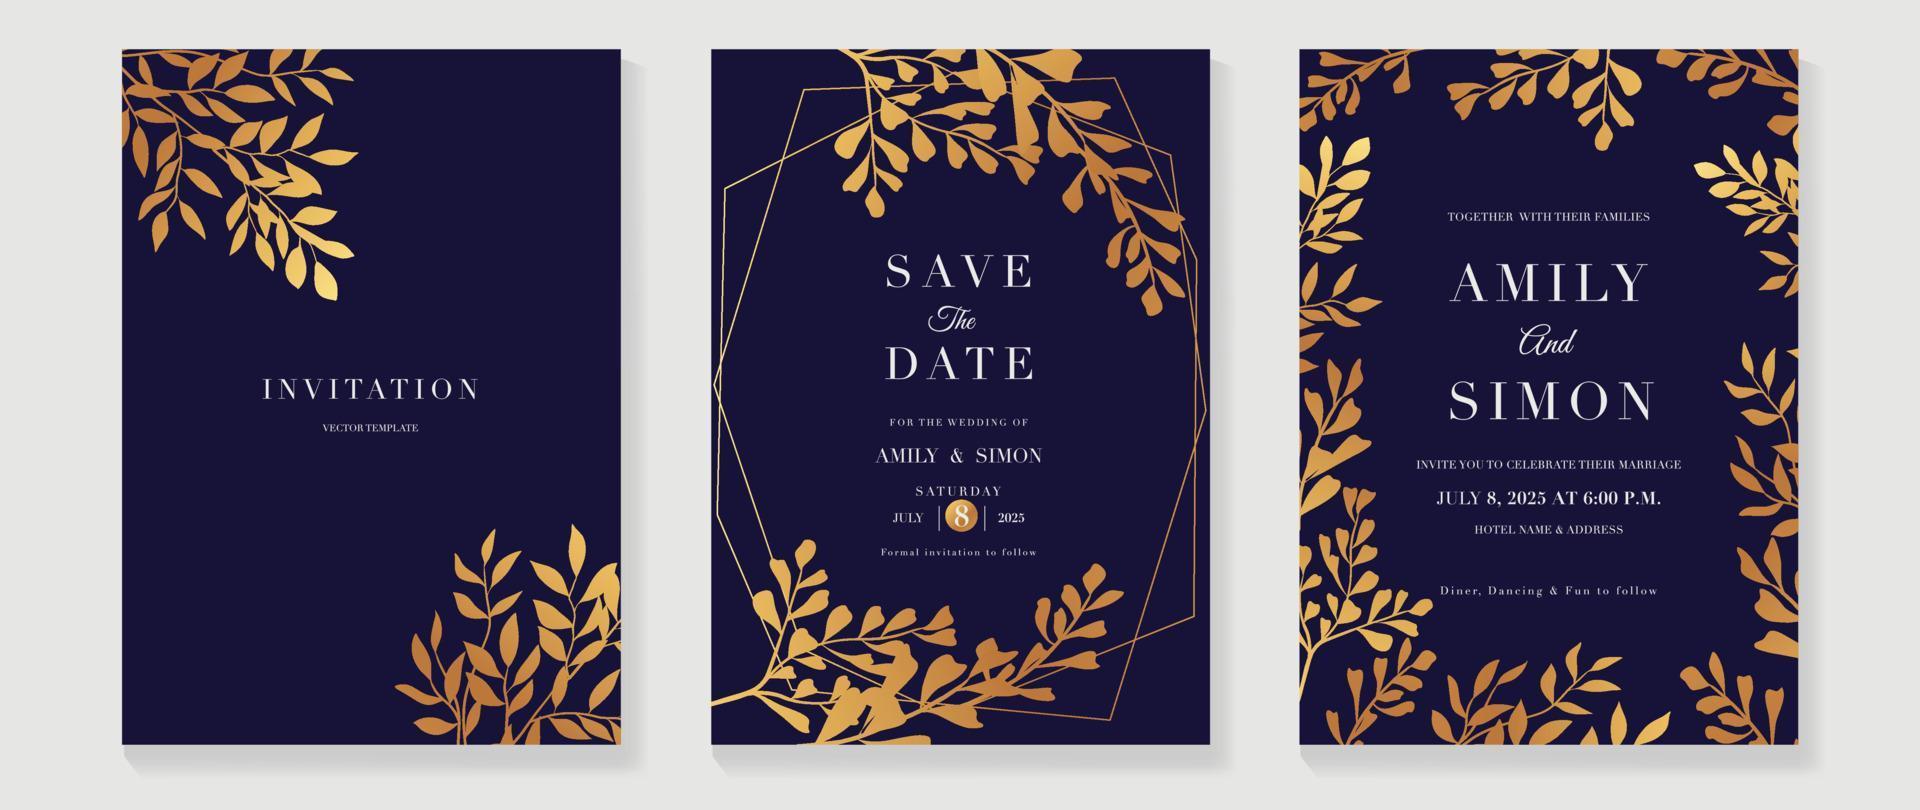 Luxury wedding invitation card background vector. Golden texture botanical floral leaf branch with geometric frame line art template. Design illustration for wedding and vip cover template, banner. vector